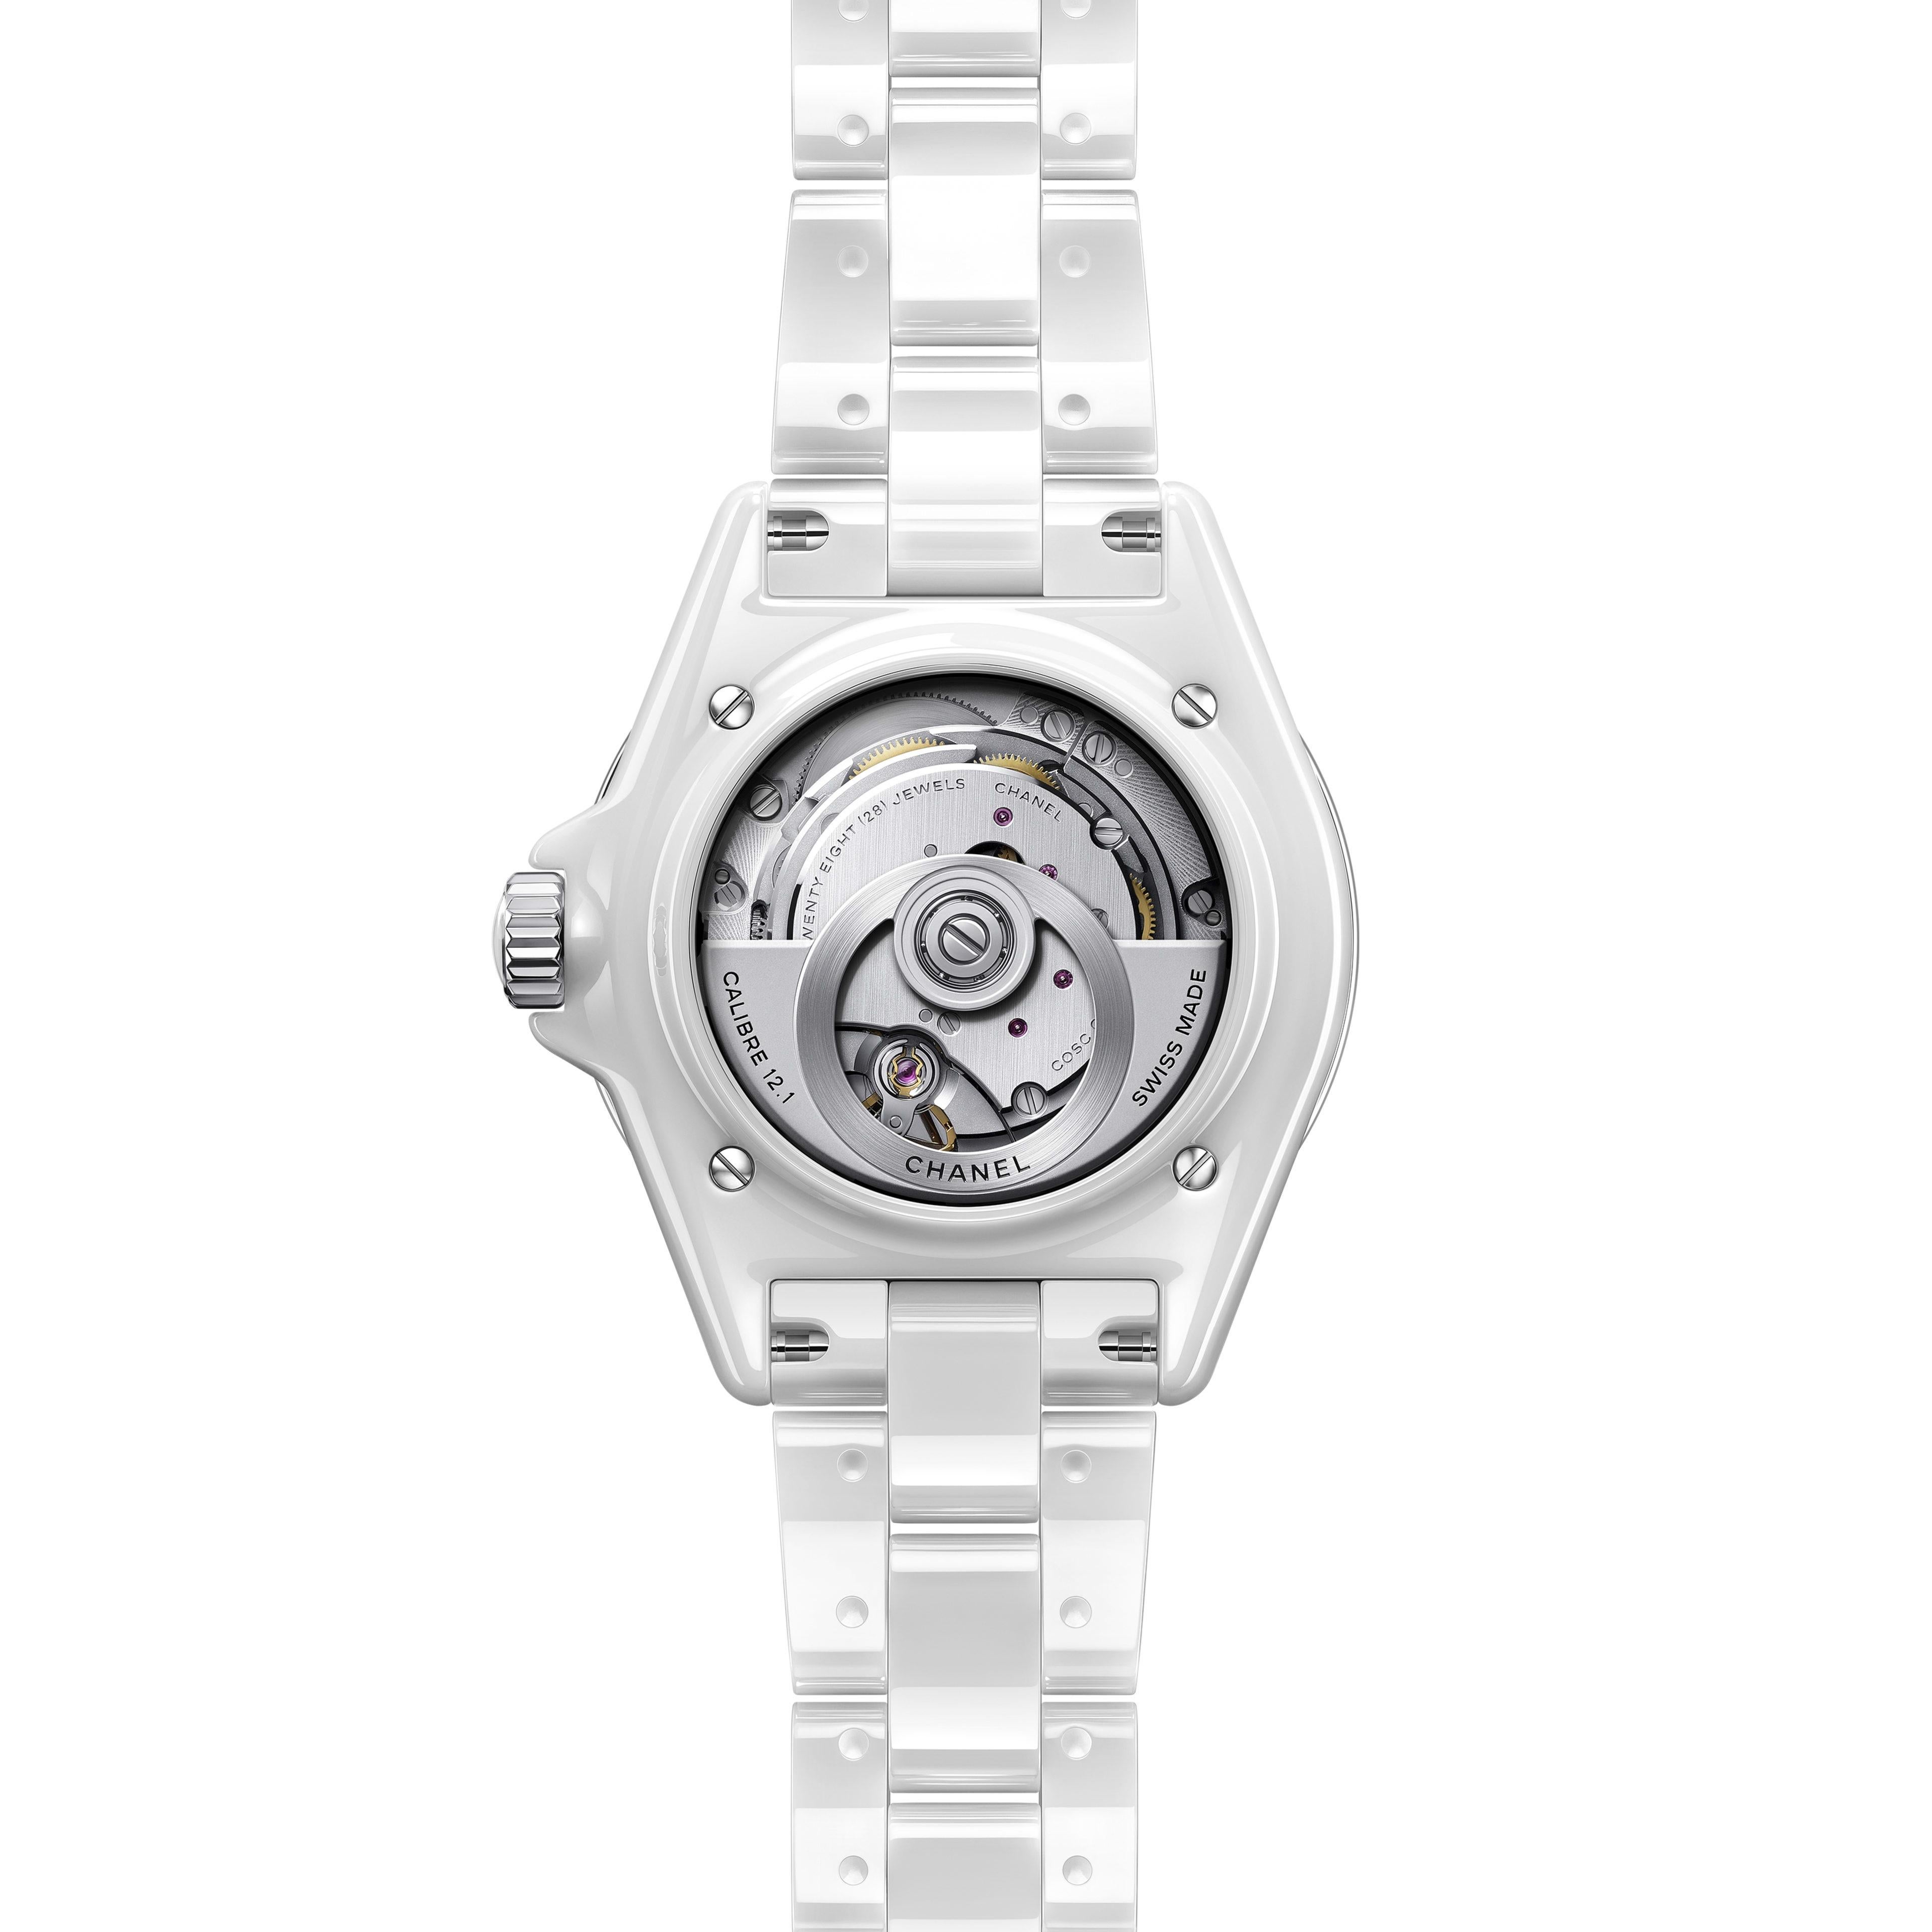 White ceramic case with a white ceramic bracelet. Uni-directional rotating stainless steel bezel with a white ceramic inlay. White dial with luminous silver-tone hands and diamond hour markers. Minute markers around the outer rim. Dial Type: Analog.